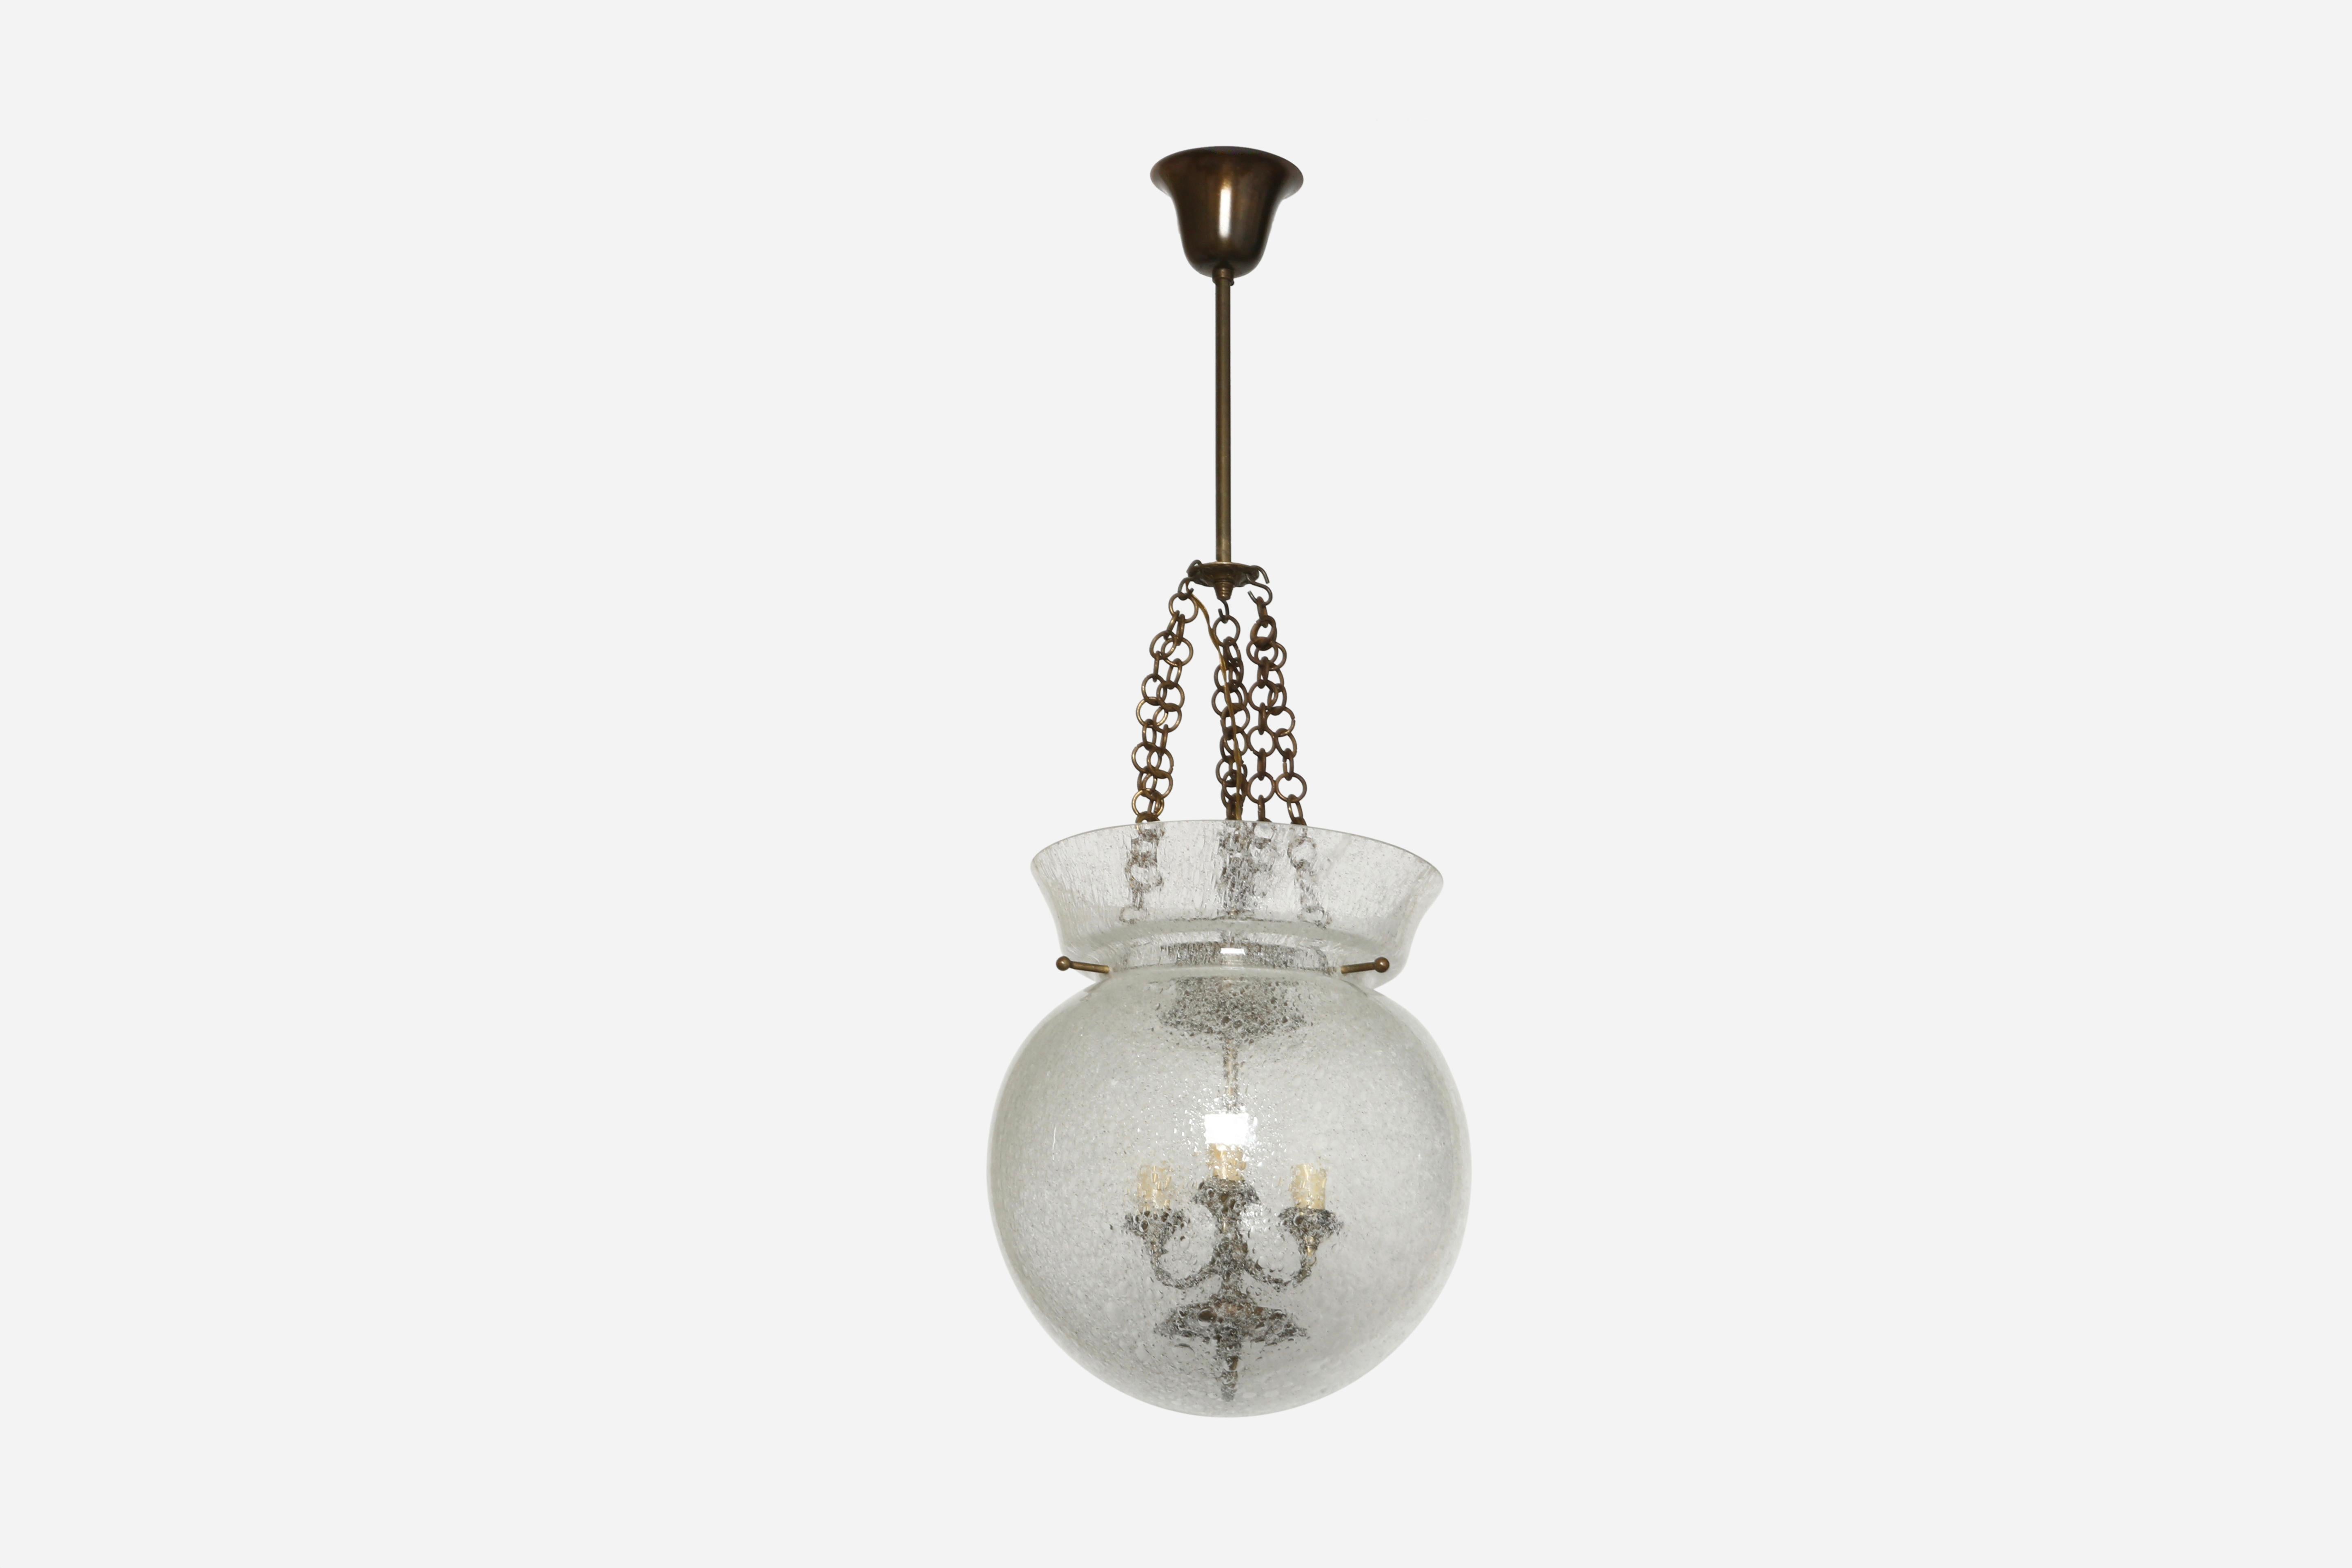 Bell Jar lantern in pulegoso glass.
Murano glass, patinated brass.
Designed and made in Italy in 1960s.

We take pride in bringing vintage fixtures to their full glory again.
At Illustris Lighting our main focus is to deliver lighting fixtures to